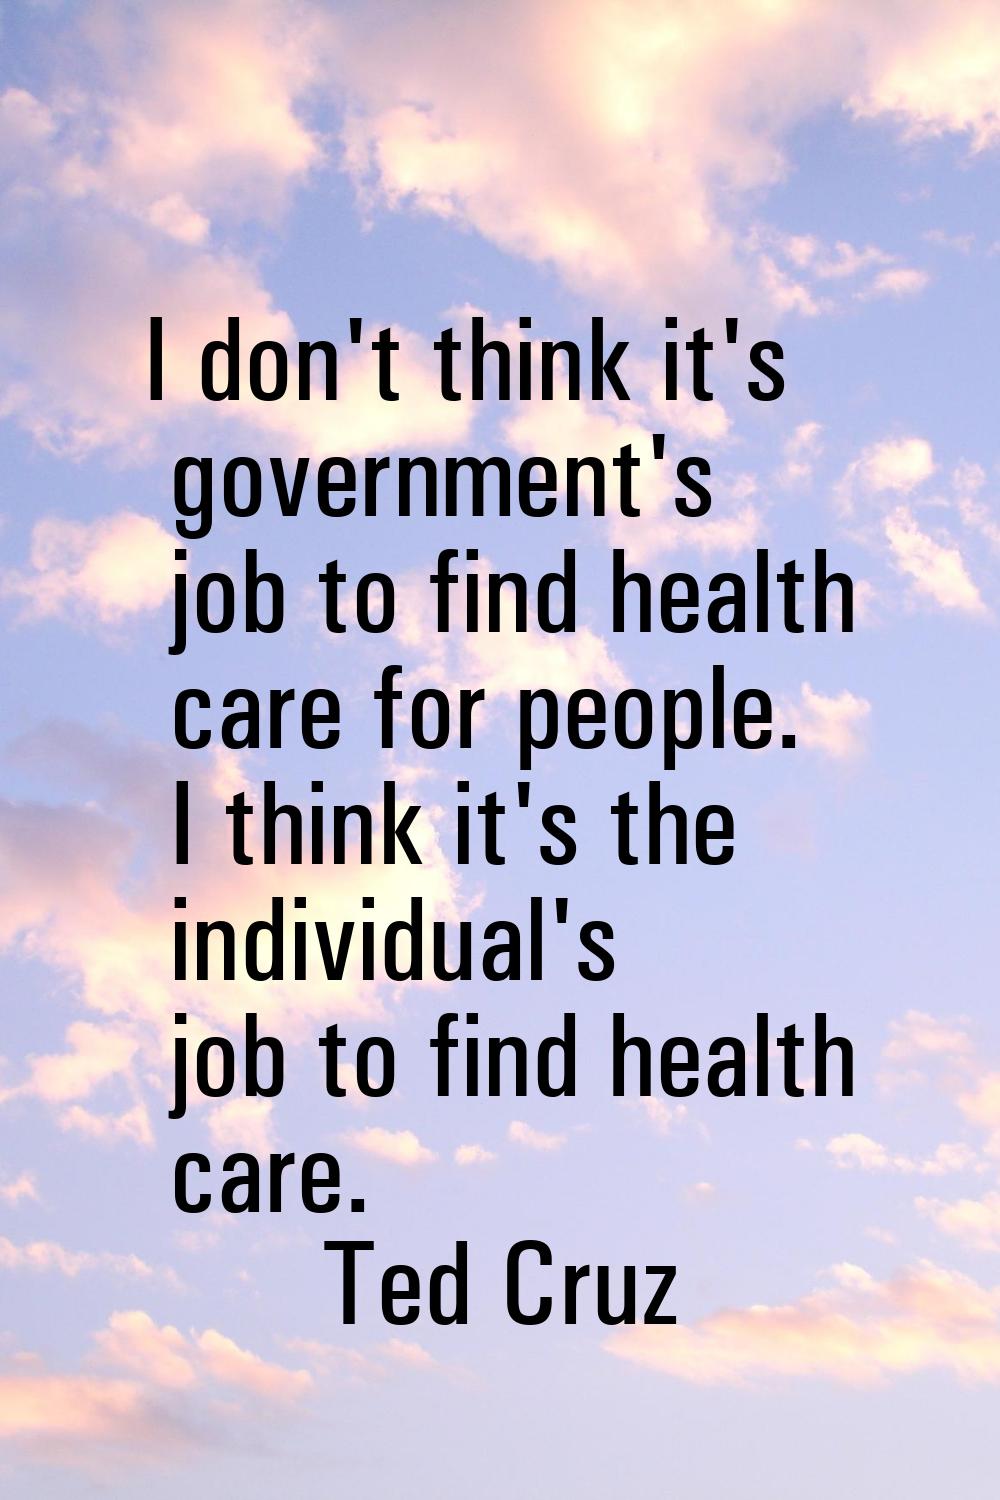 I don't think it's government's job to find health care for people. I think it's the individual's j